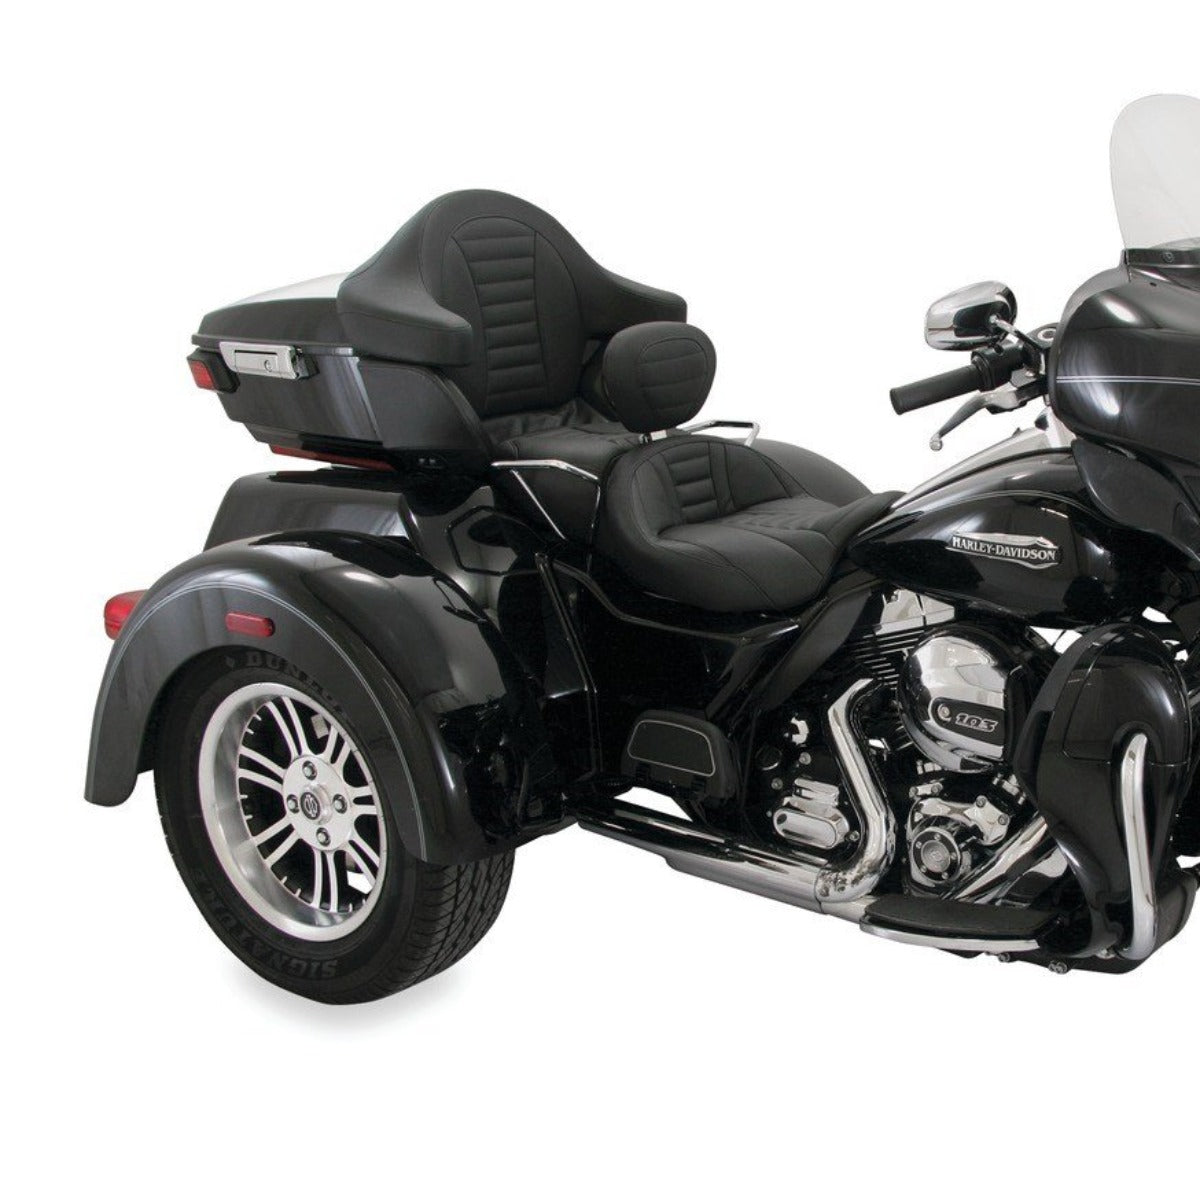 Mustang Extended Arm Wrap-Around Backrest for Harley-Davidson FL Touring 2014-'20